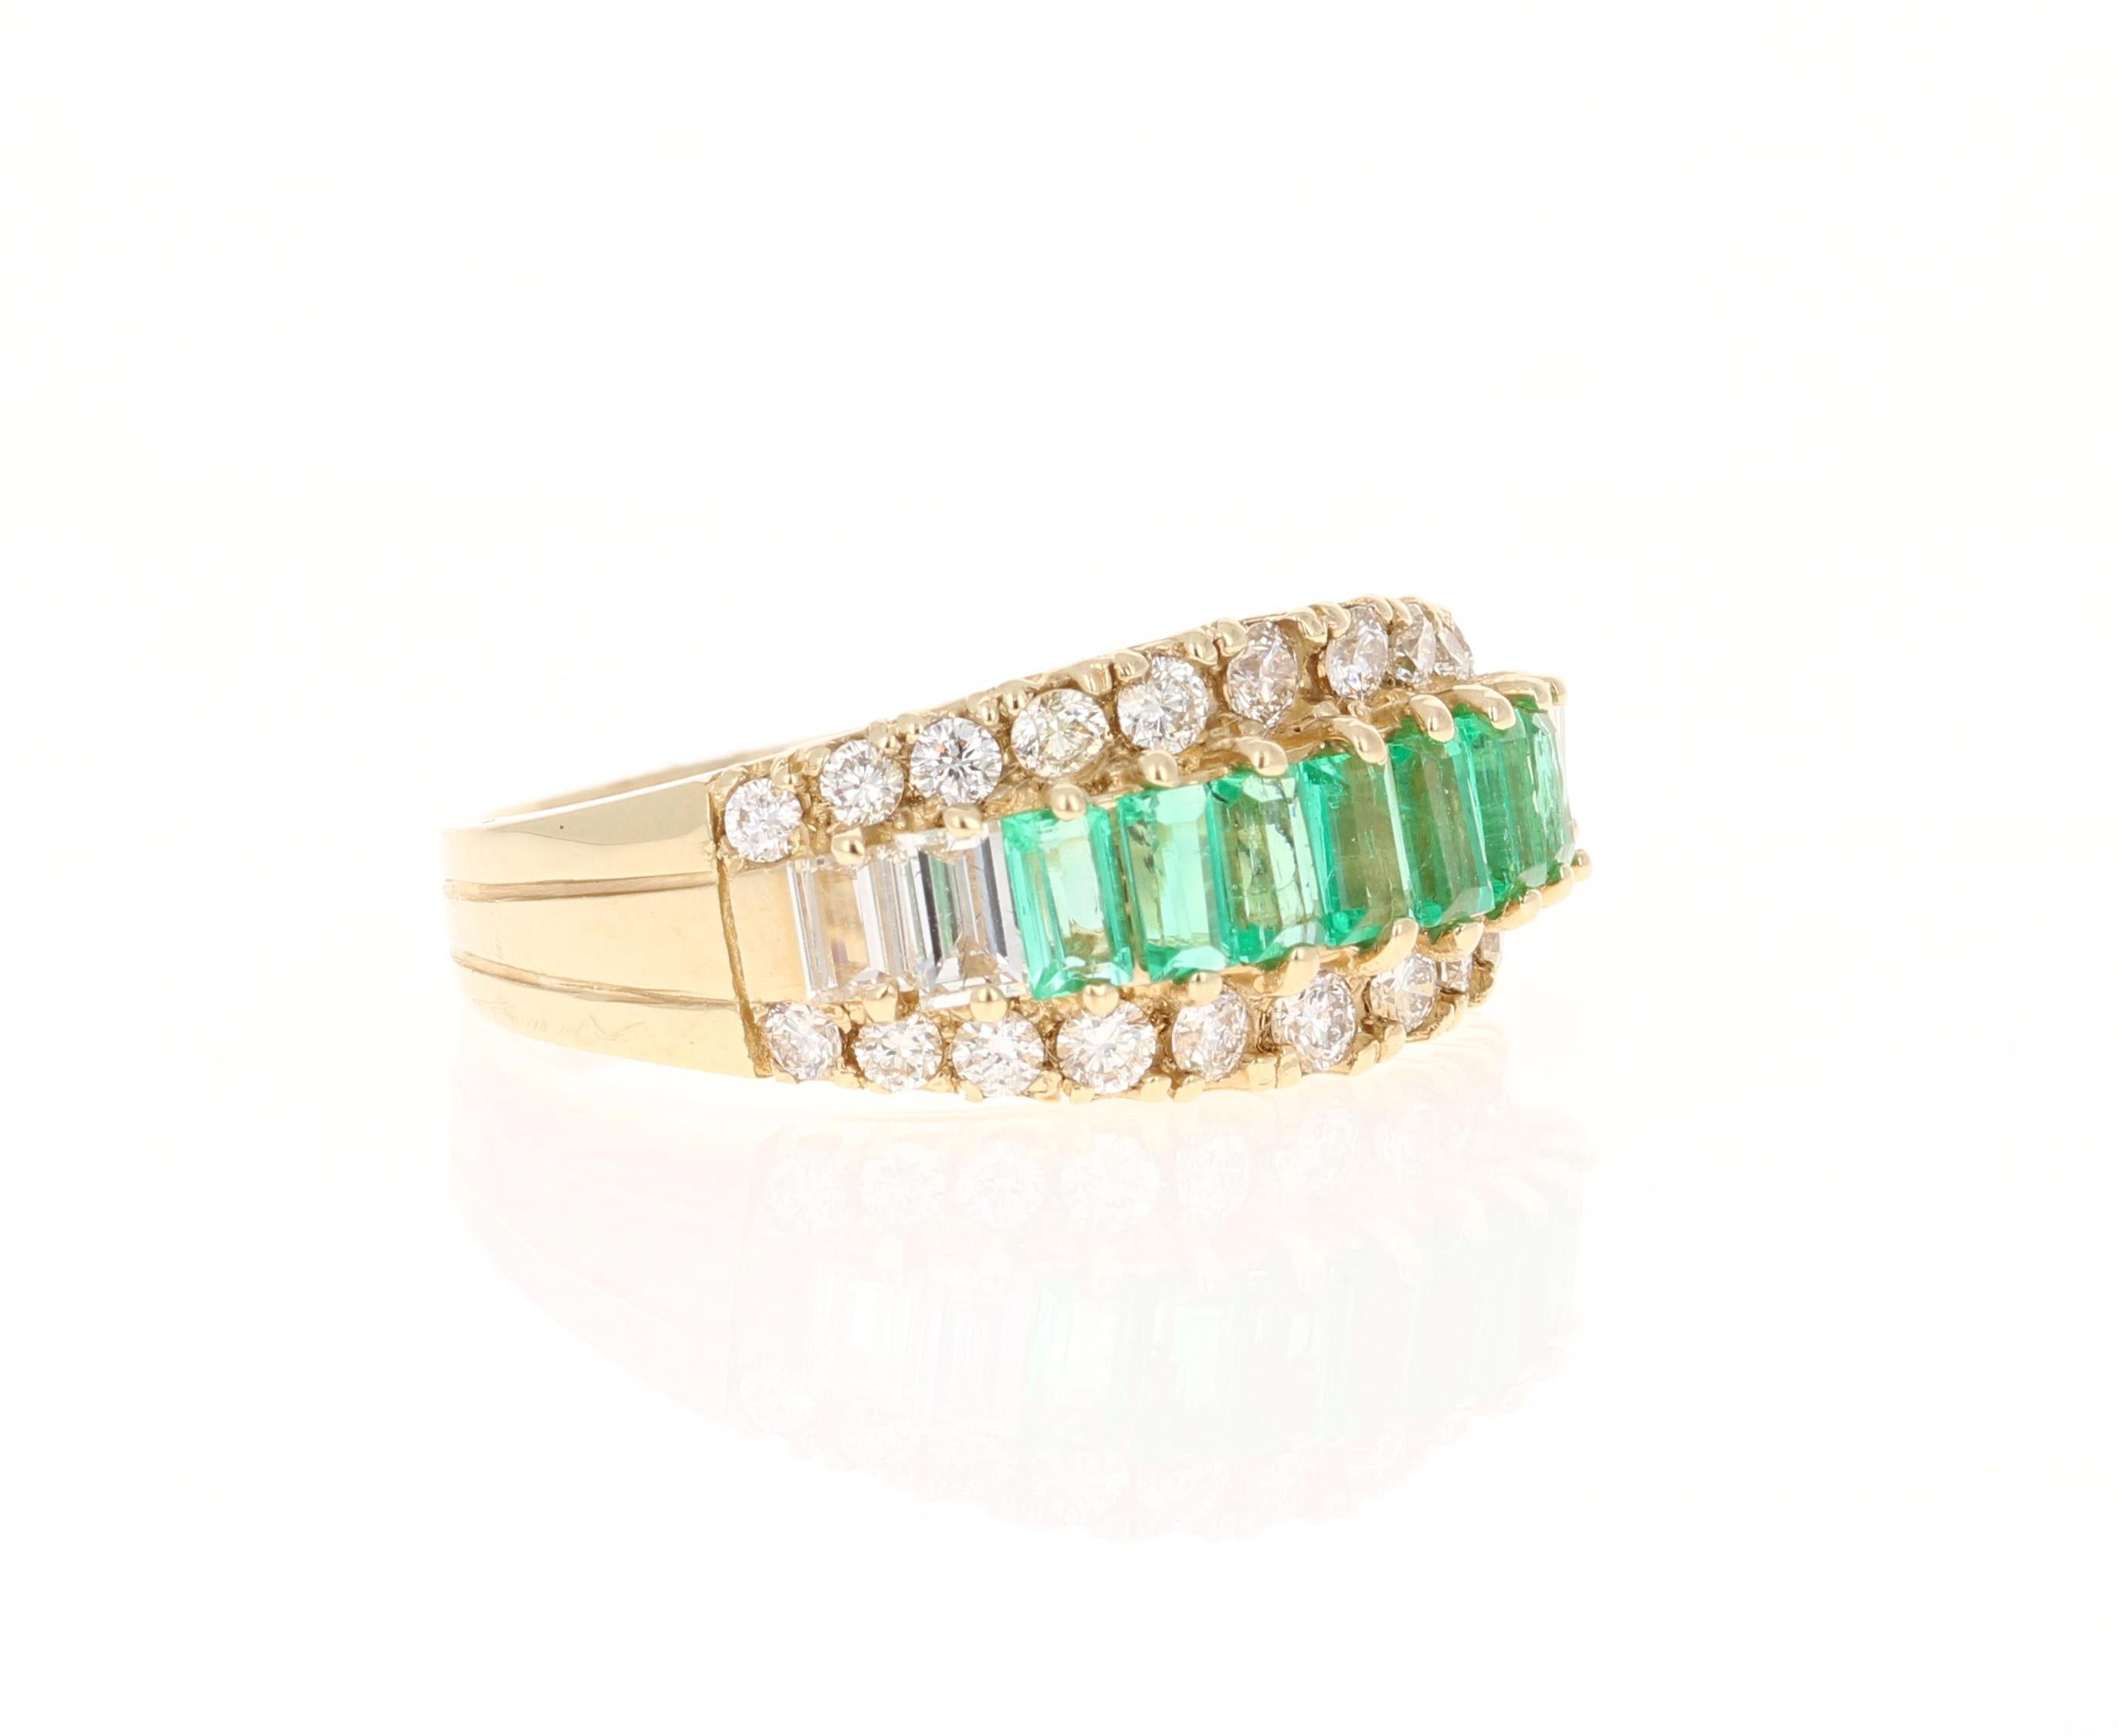 This ring has 7 Natural Baguette Cut Emeralds that weigh 0.77 carats as well as 4 Baguette Cut Natural Diamonds that weigh 0.36 carats. (Clarity: VS, Color: H). It is further surrounded by 22 Round Cut Diamonds that weigh 0.58 carats. (Clarity: VS,